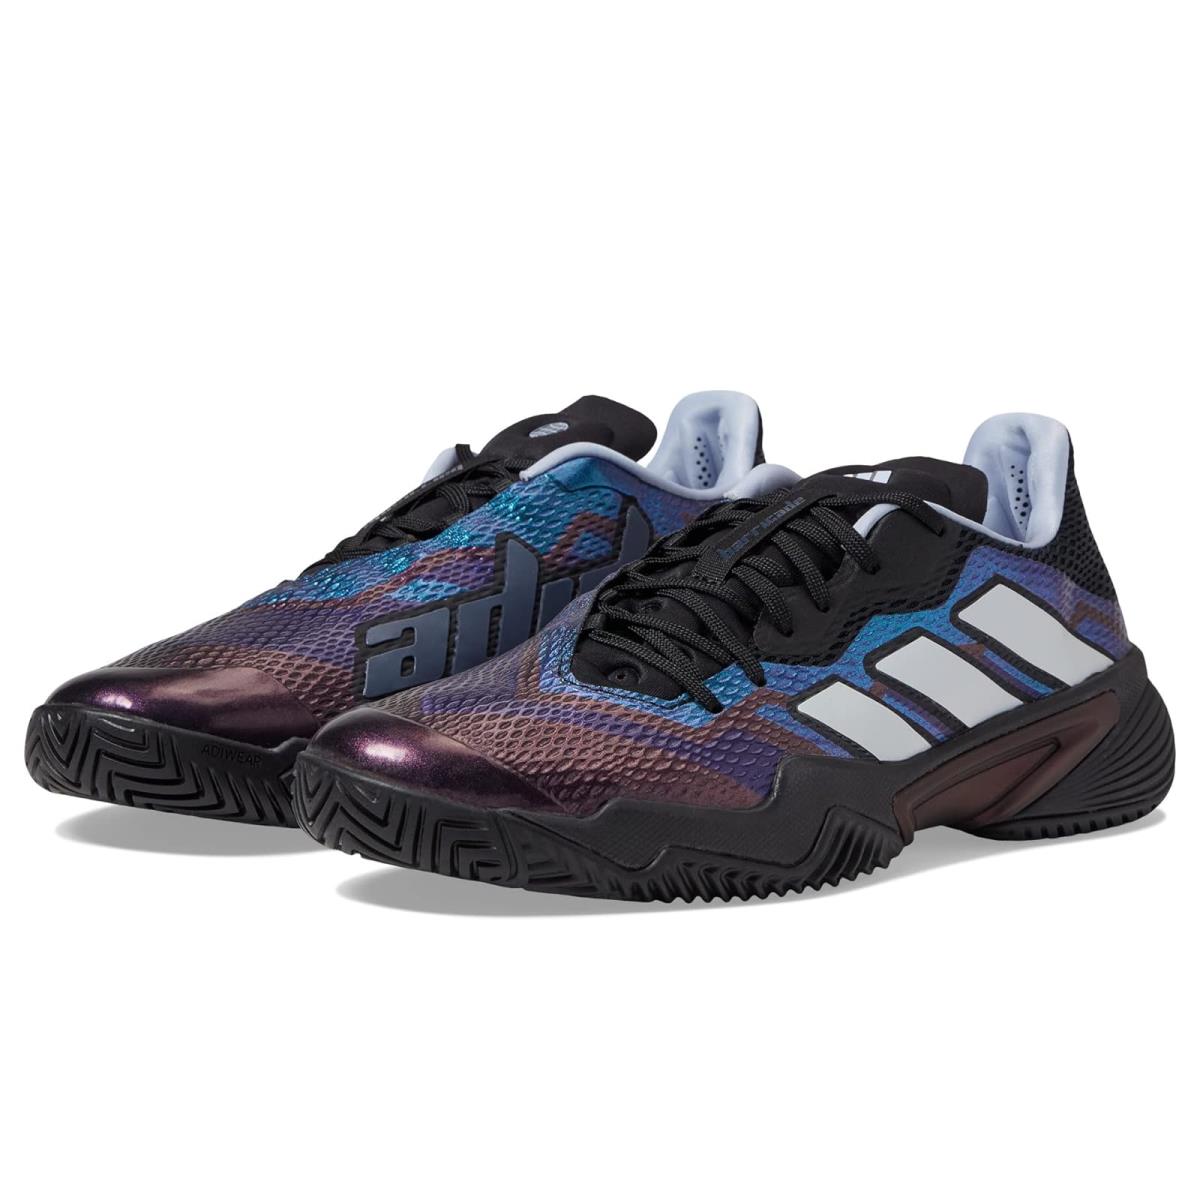 Man`s Sneakers Athletic Shoes Adidas Barricade Black/White/Blue Dawn